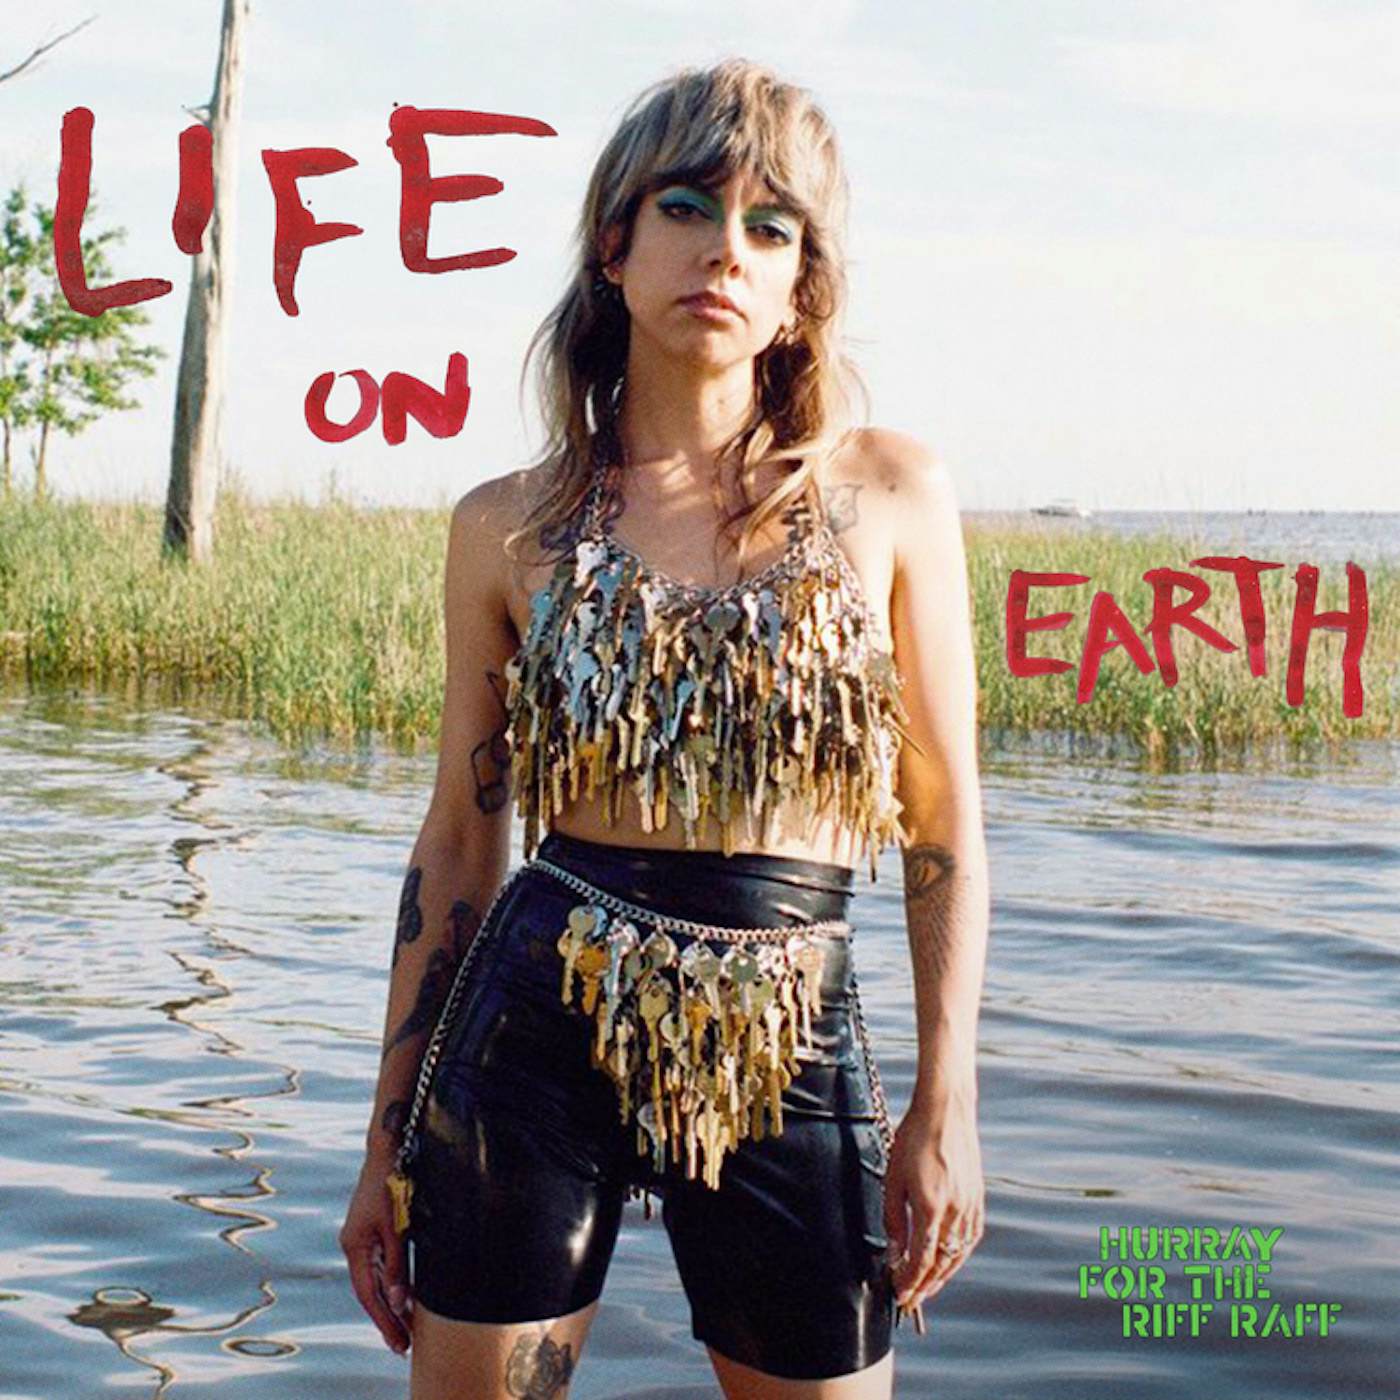 Hurray For The Riff Raff LIFE ON EARTH CD